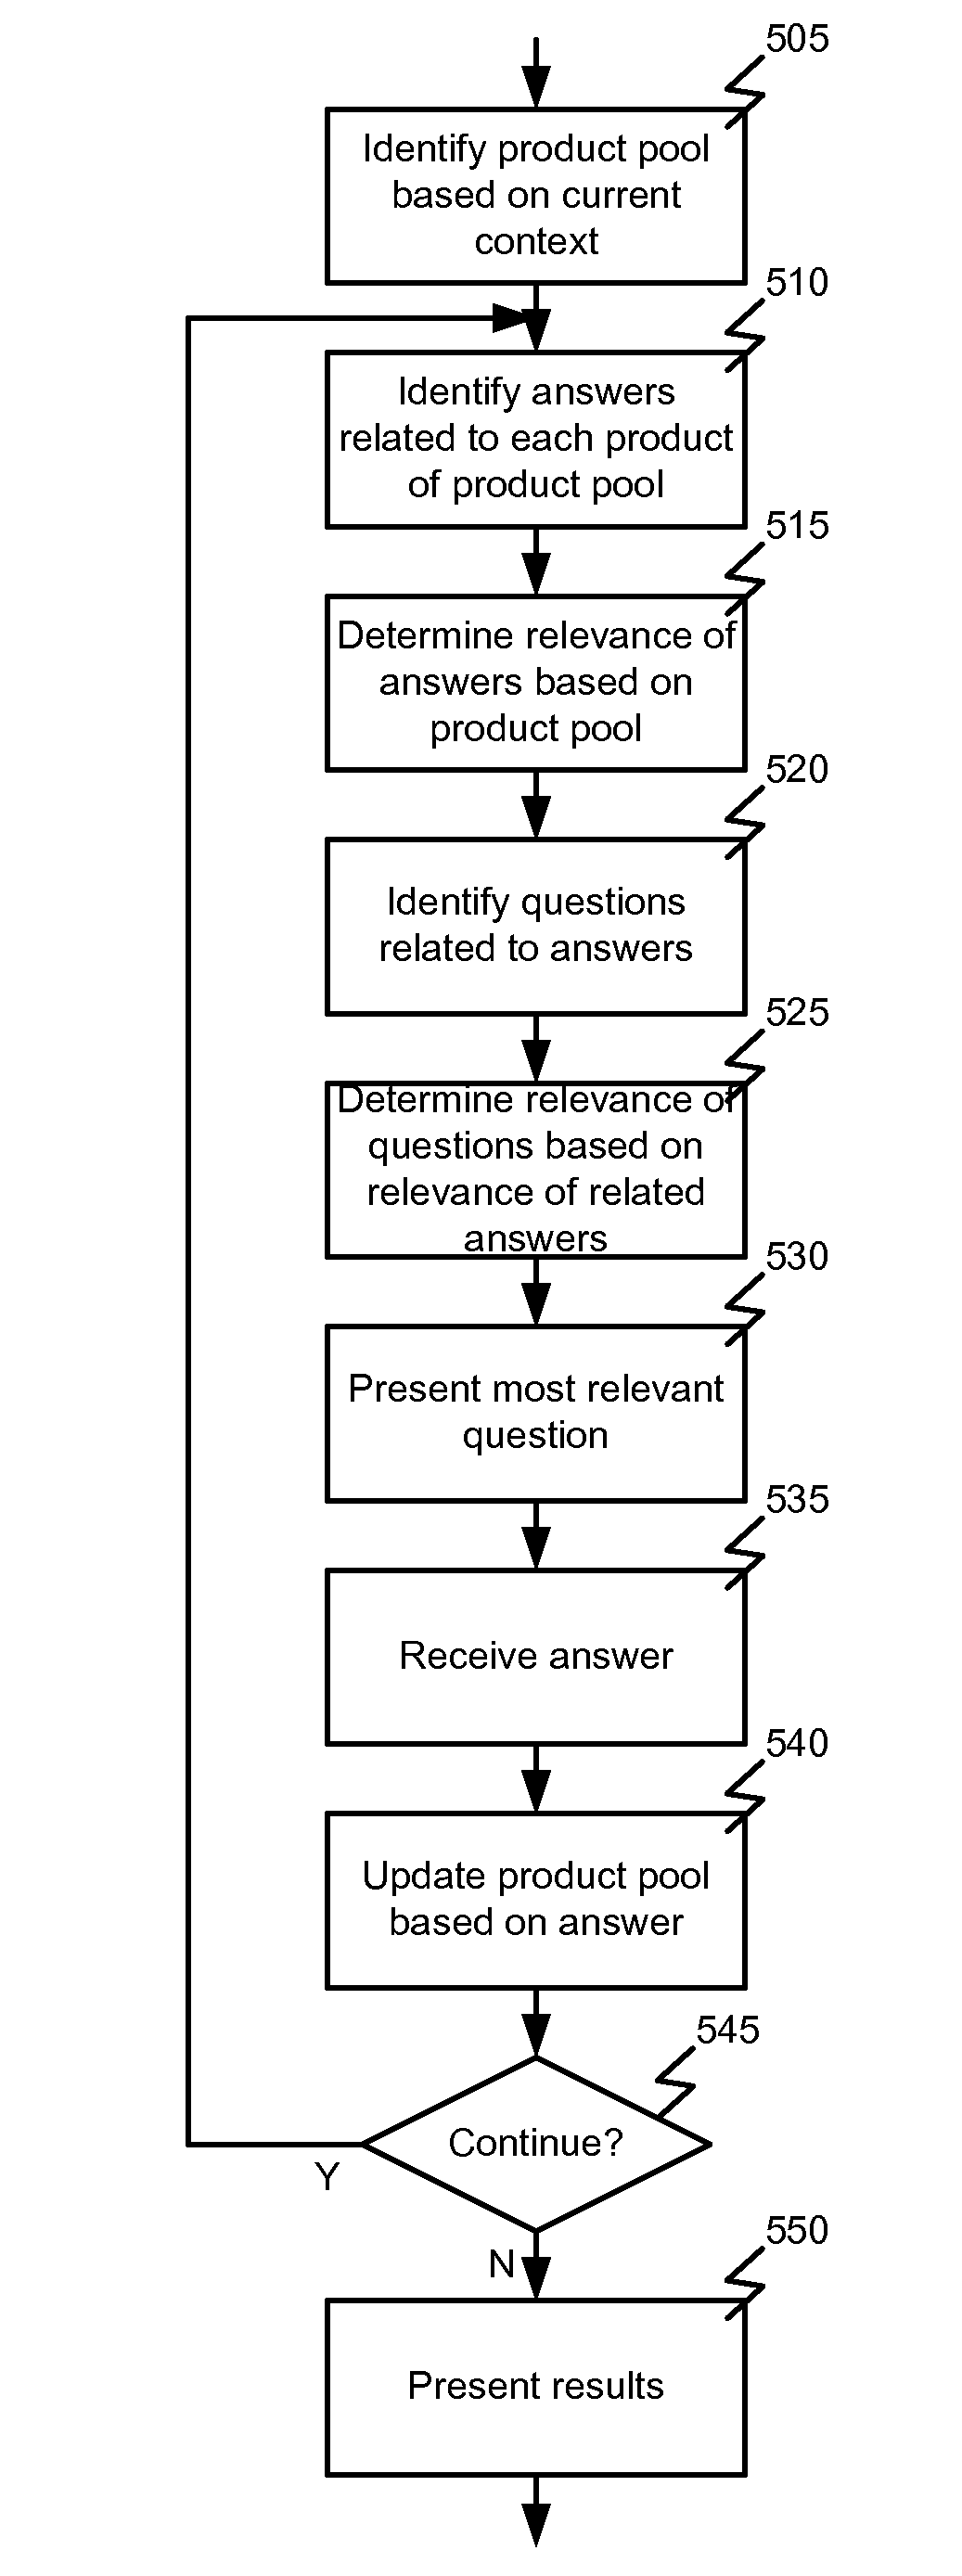 Automated decision assistant